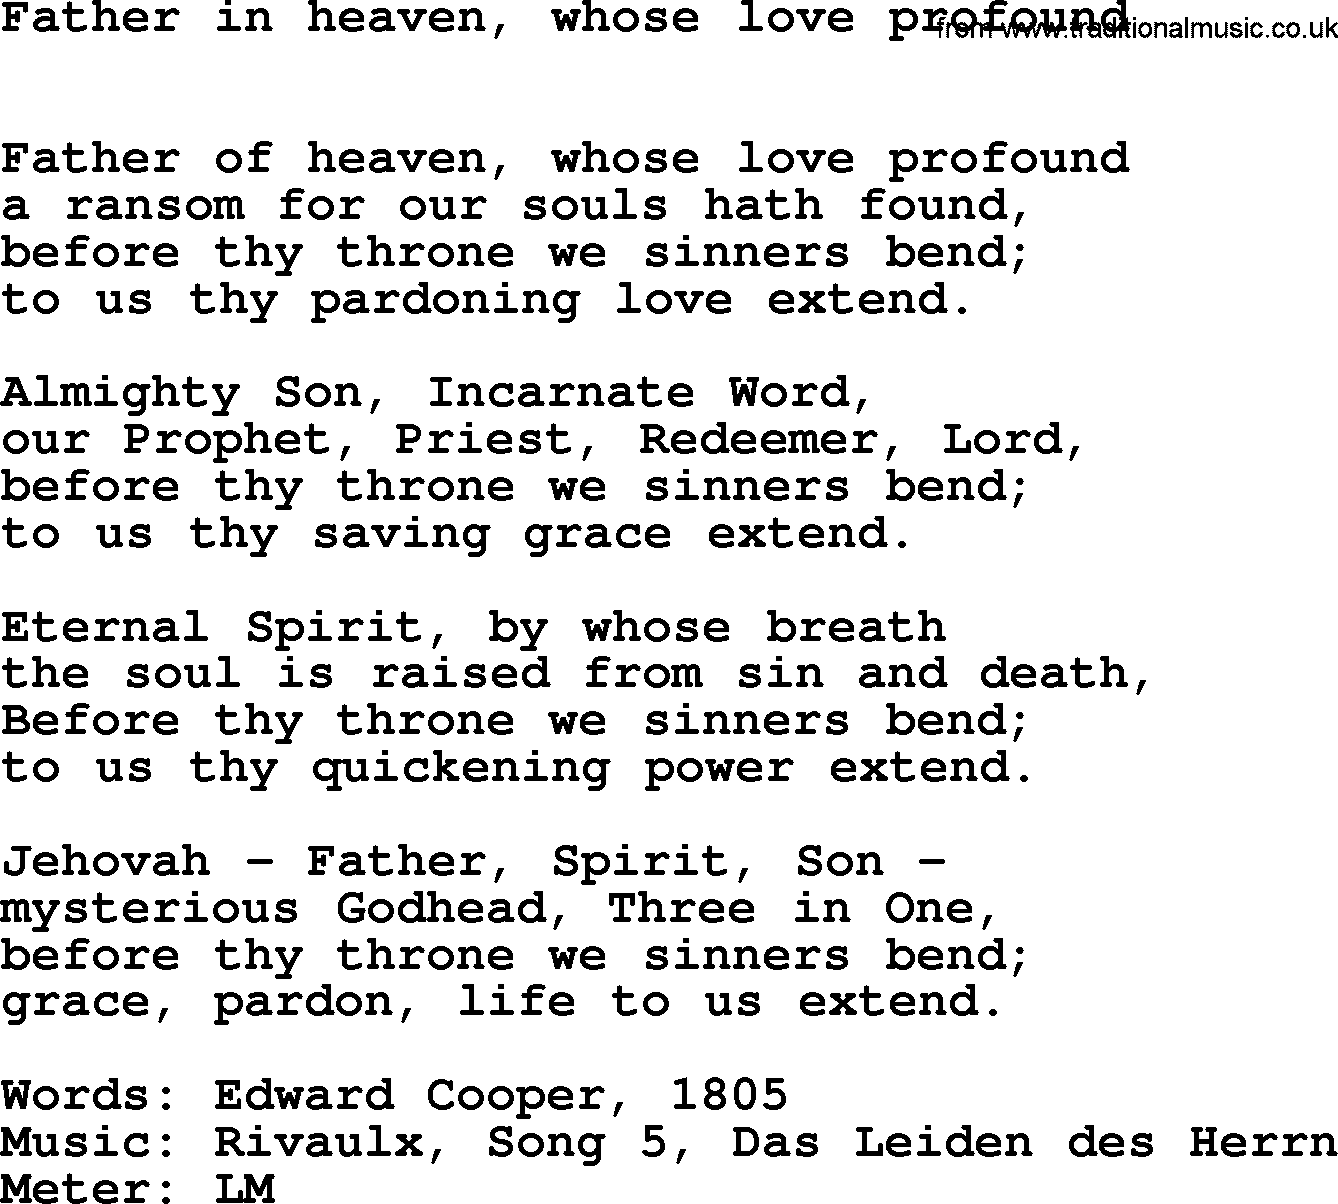 Book of Common Praise Hymn: Father In Heaven, Whose Love Profound.txt lyrics with midi music